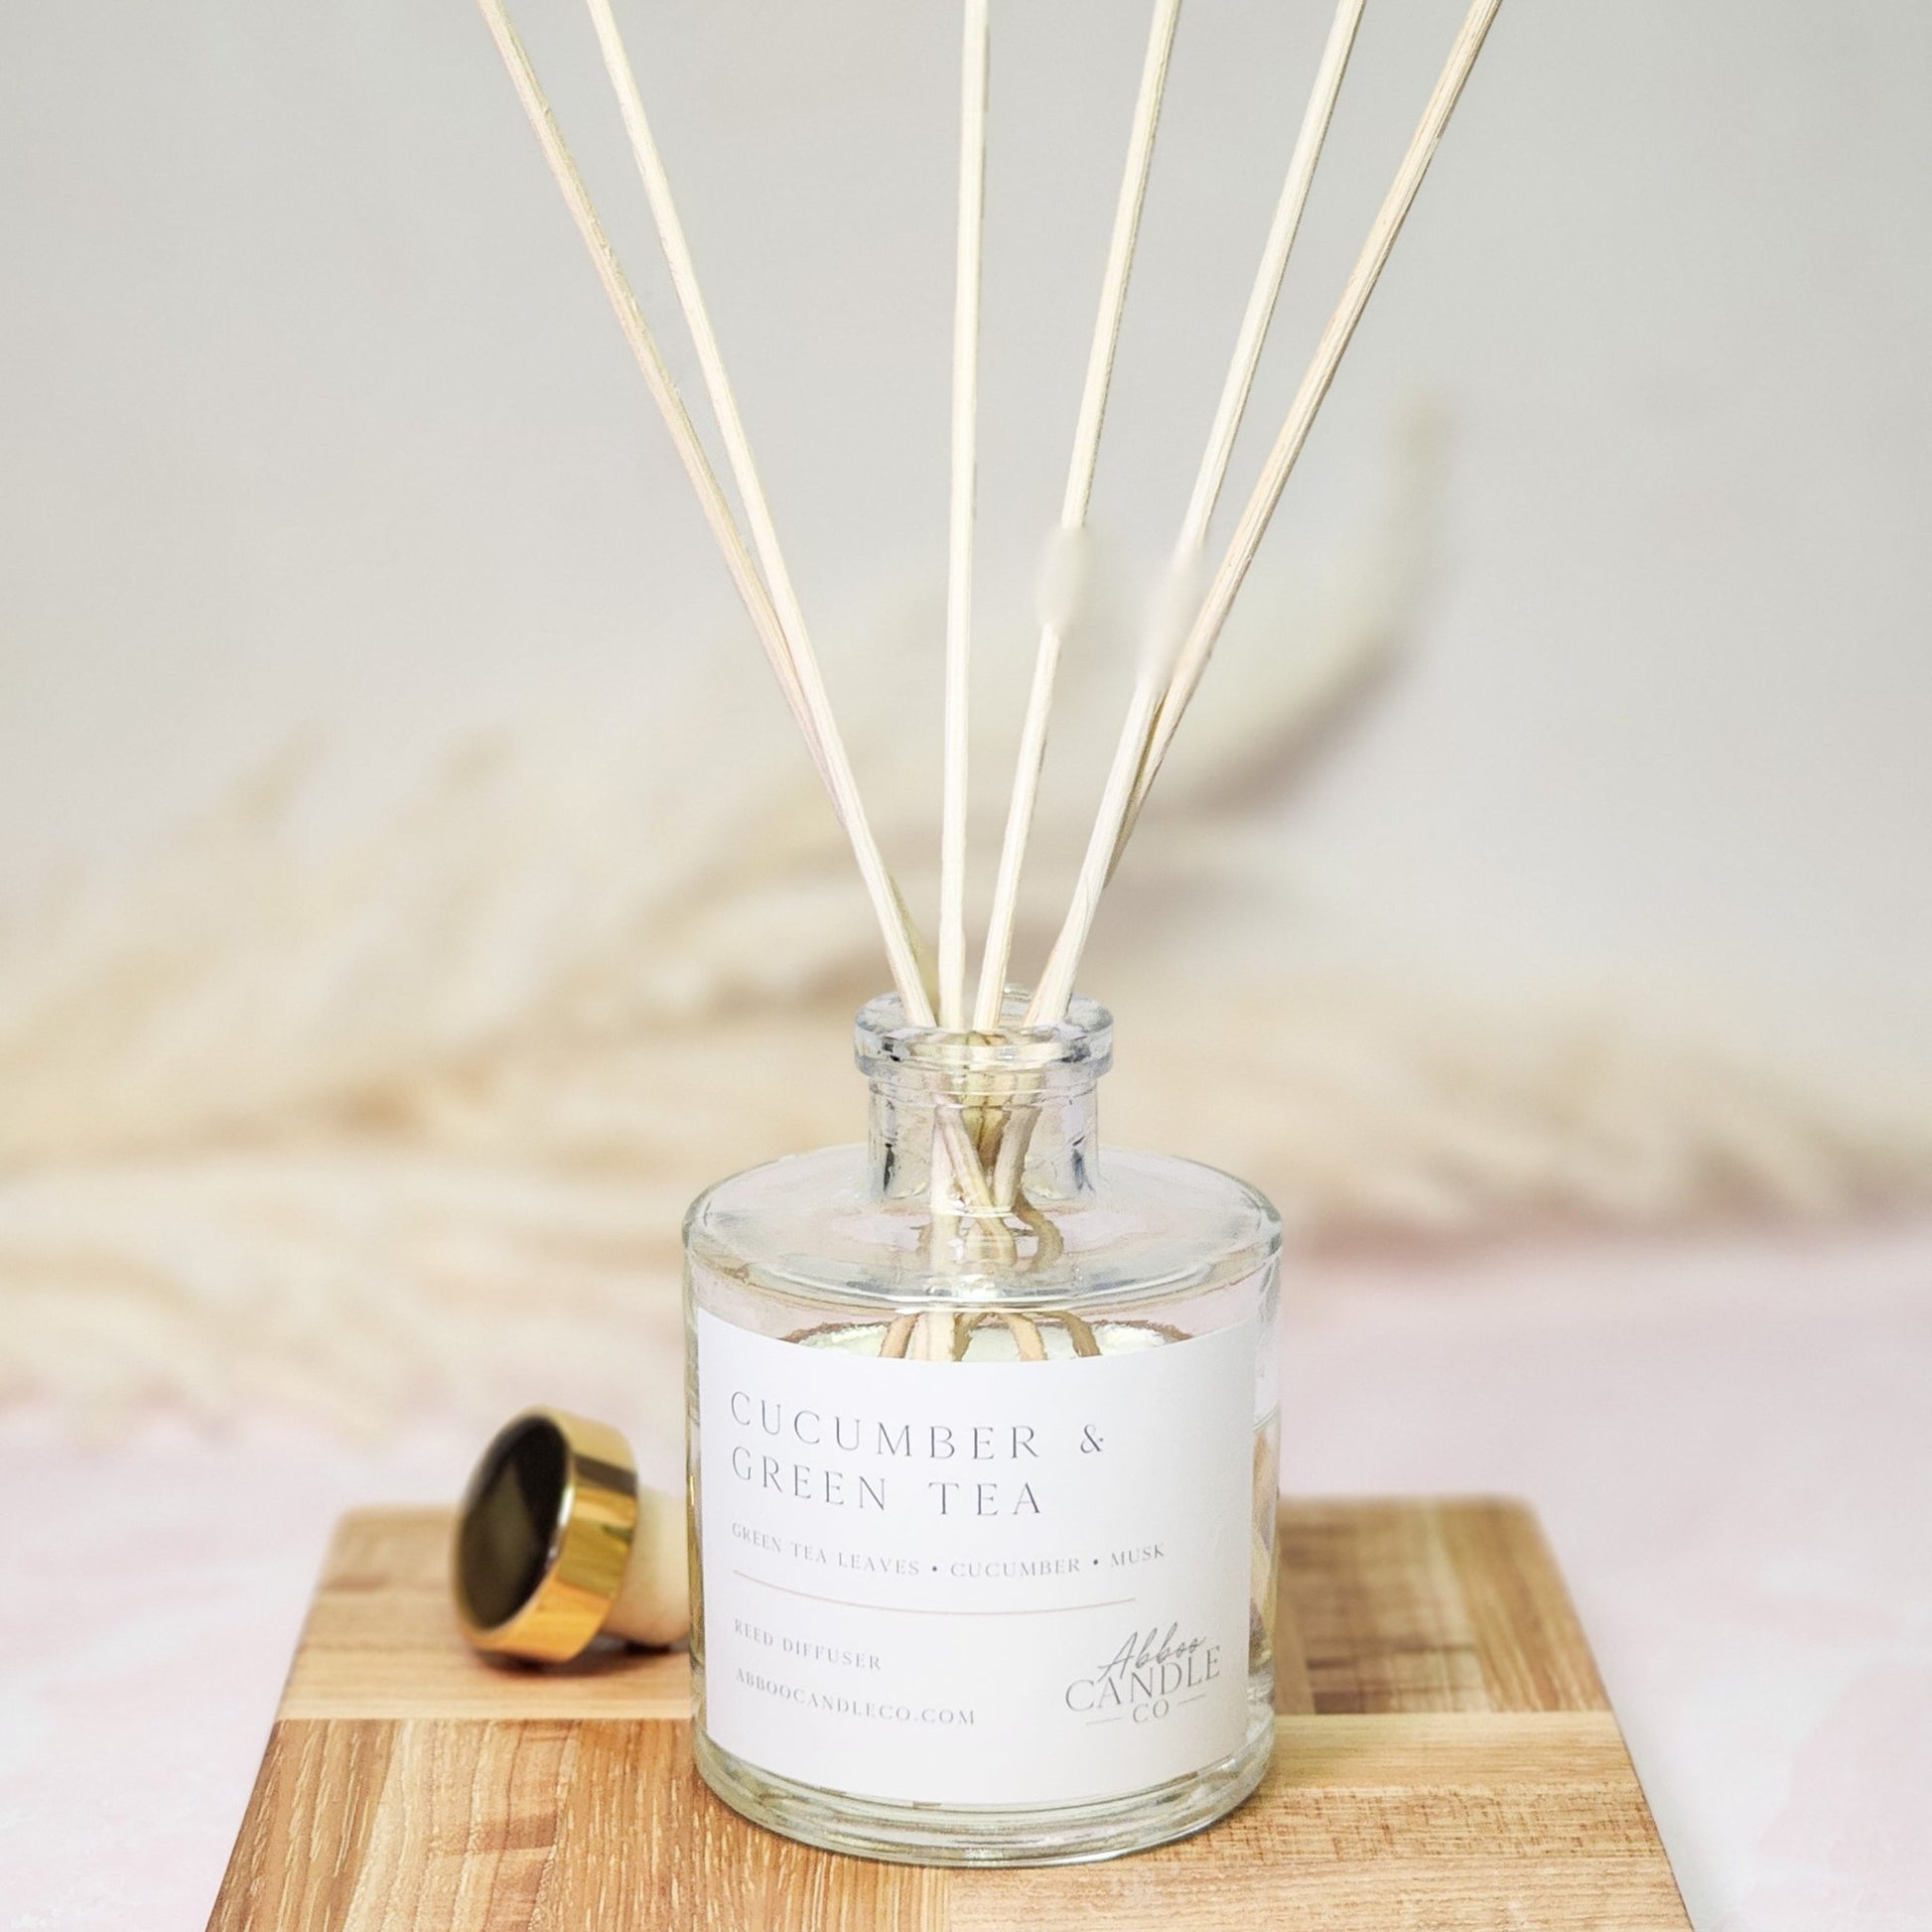 Cucumber and Green Tea Reed Diffuser - Abboo Candle Co